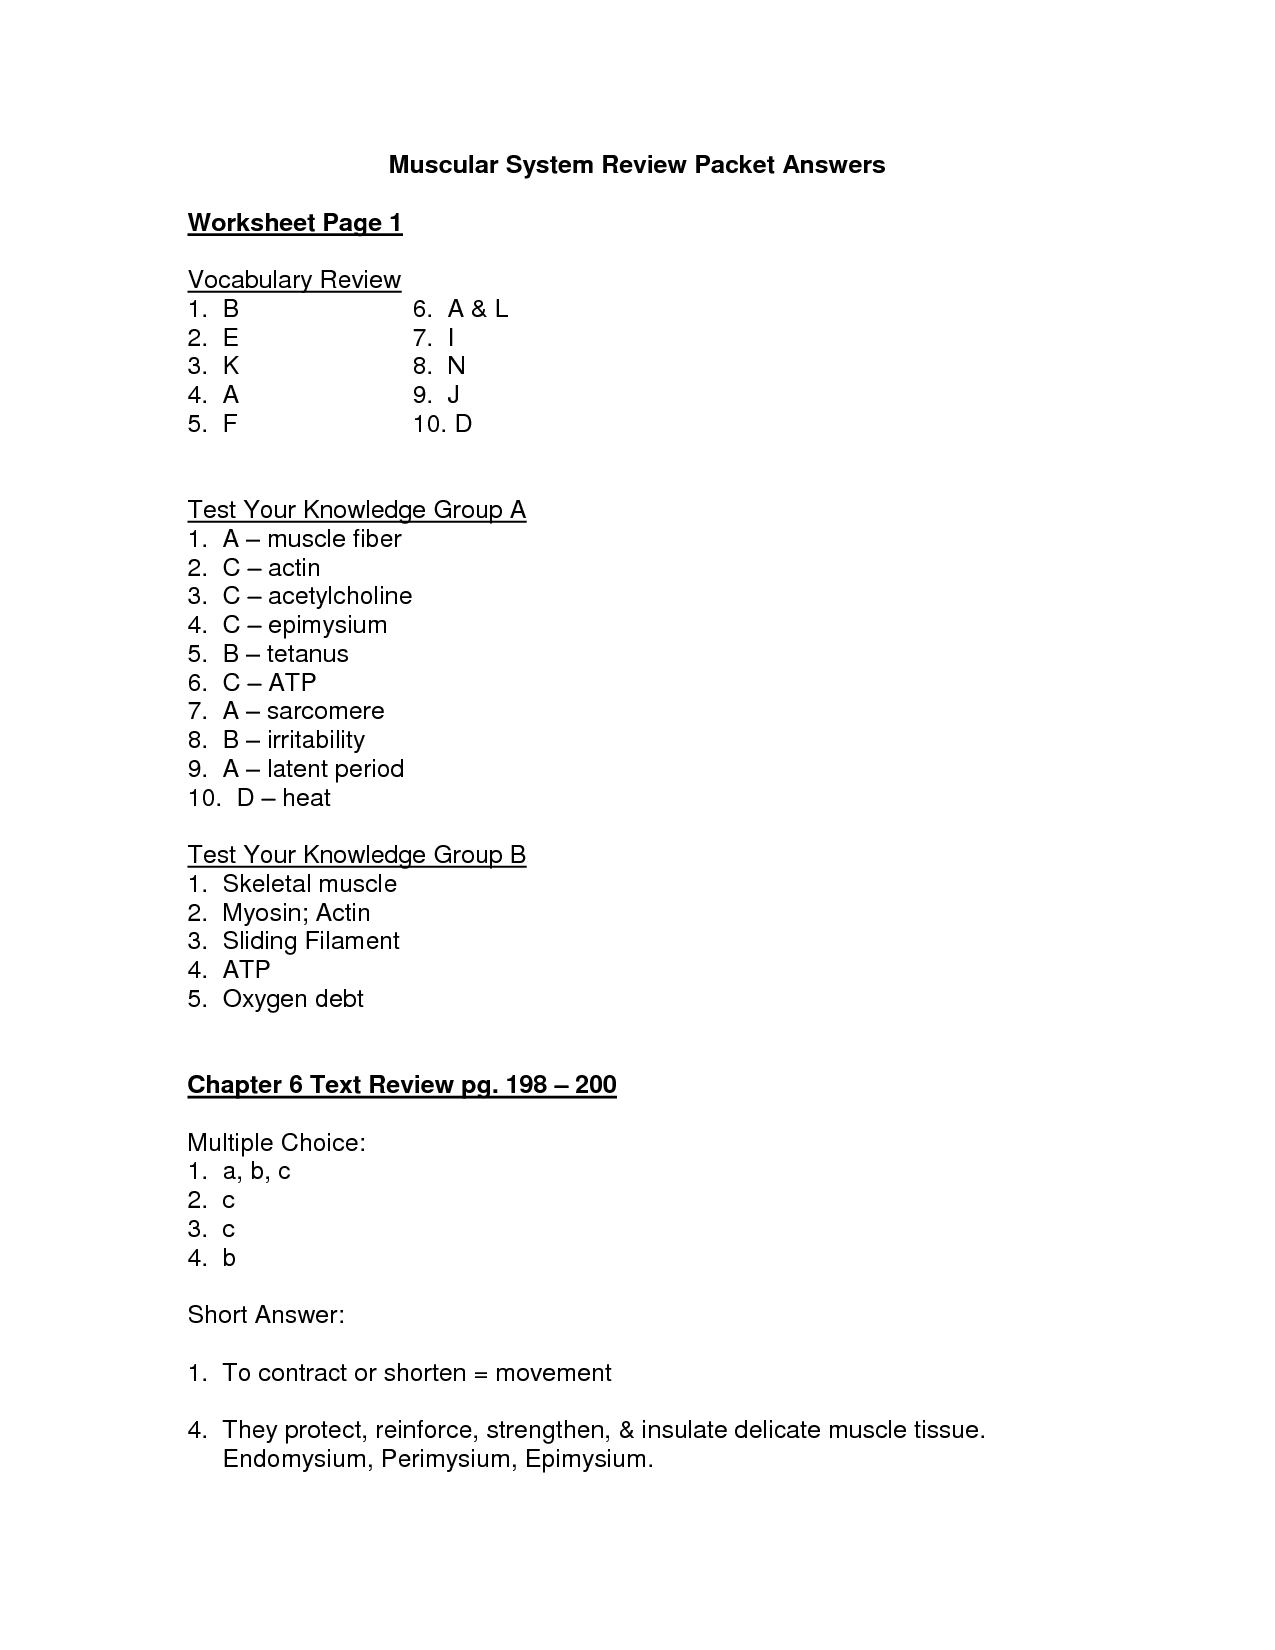 14-best-images-of-muscle-review-worksheet-label-muscles-worksheet-the-muscular-system